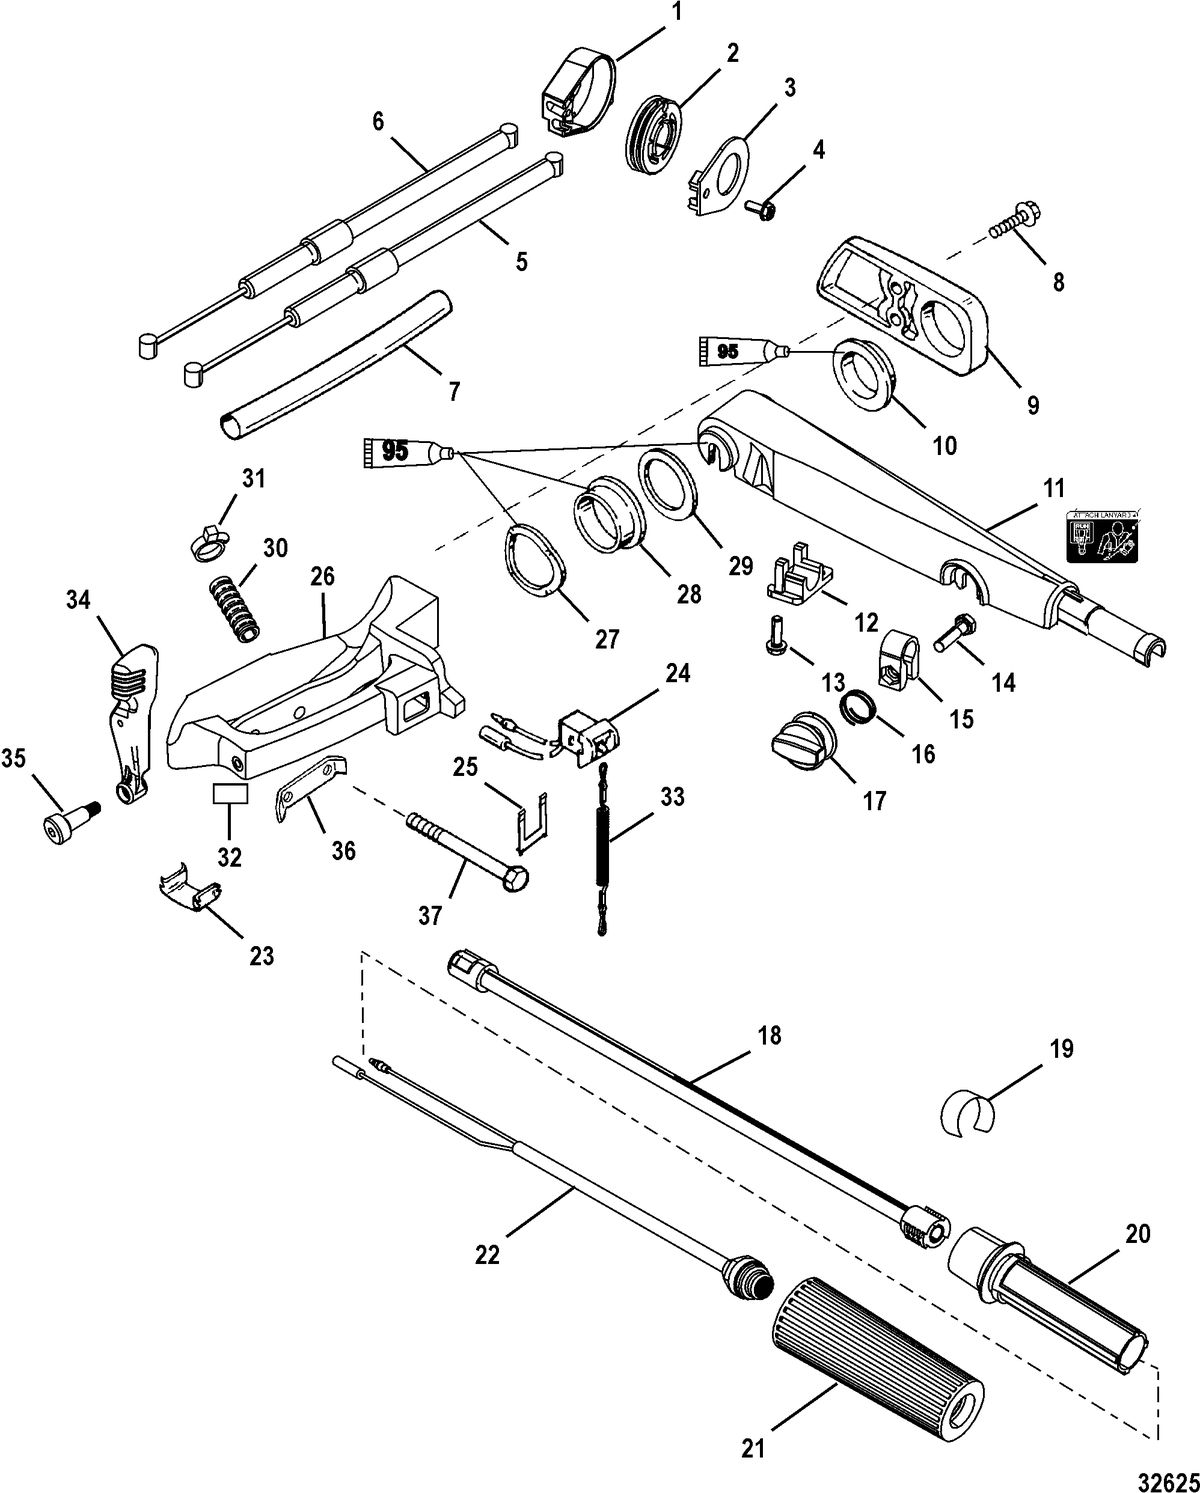 ACCESSORIES STEERING SYSTEMS AND COMPONENTS Tiller Handle Kit(Jet 40)